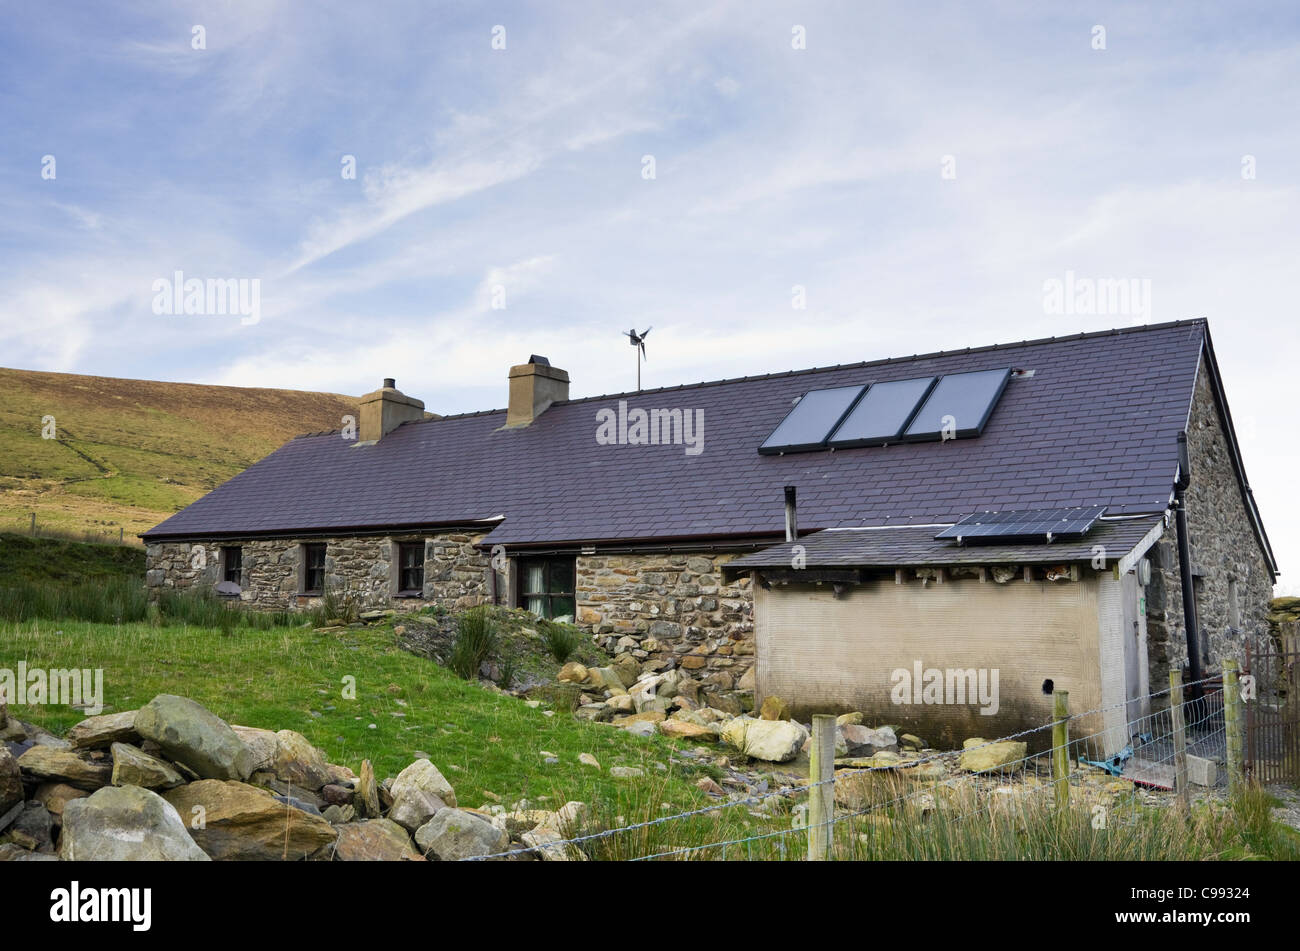 Remote rural cottage with solar panels on roof for heating hot water and generating electricity with small wind turbine spinning Stock Photo